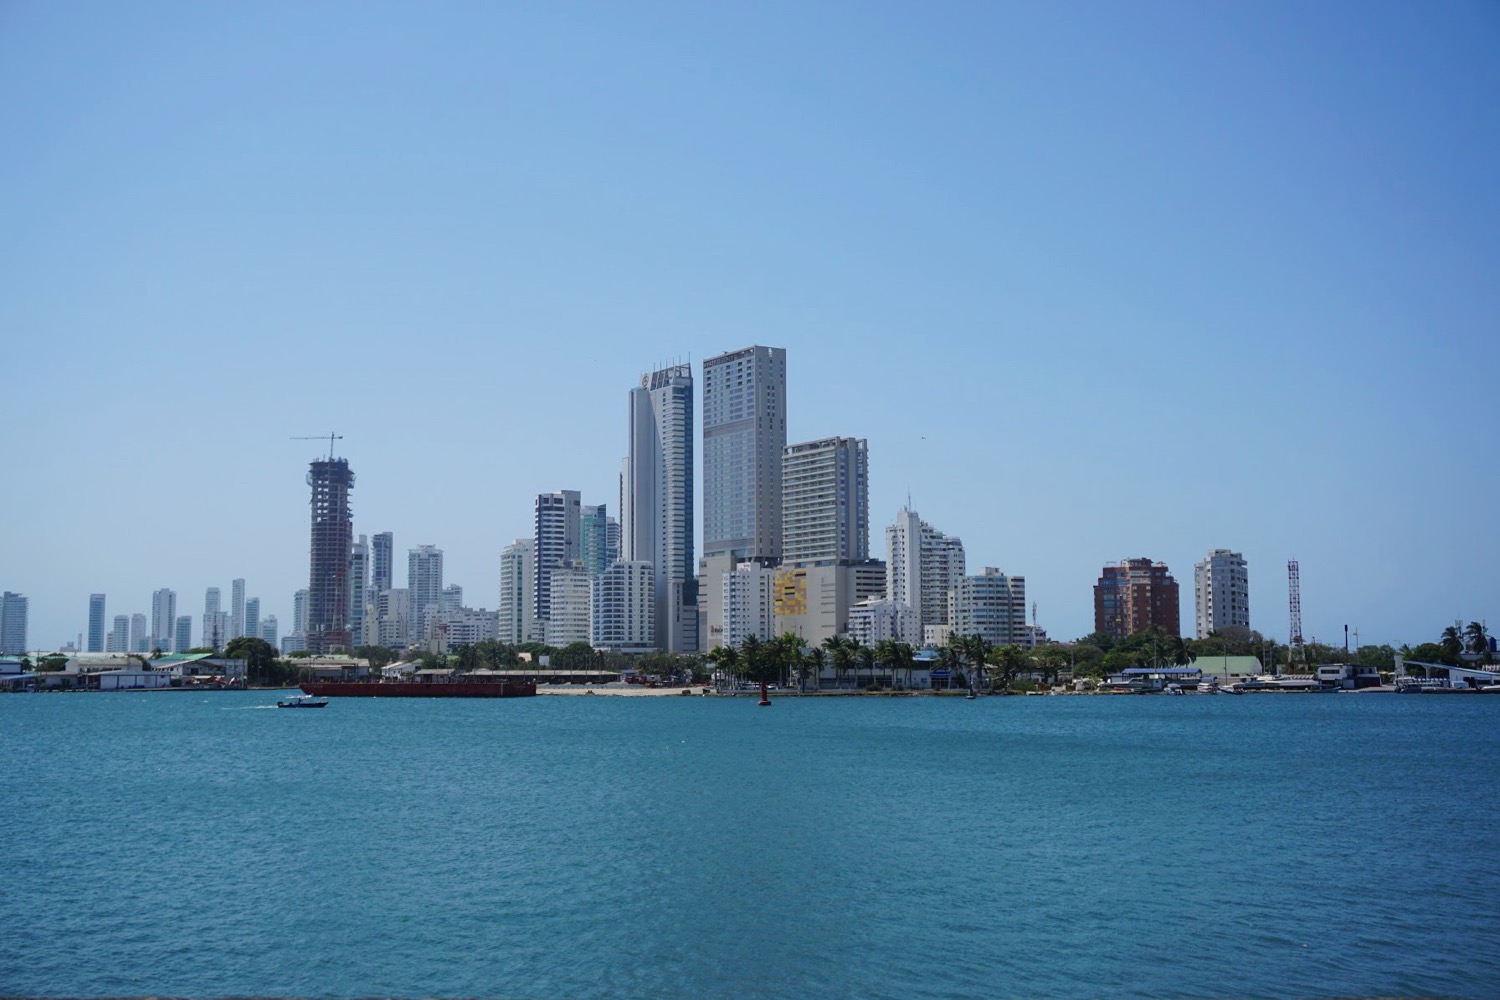 Photo across the bay of the skyscrapers of New Cartagena, Colombia